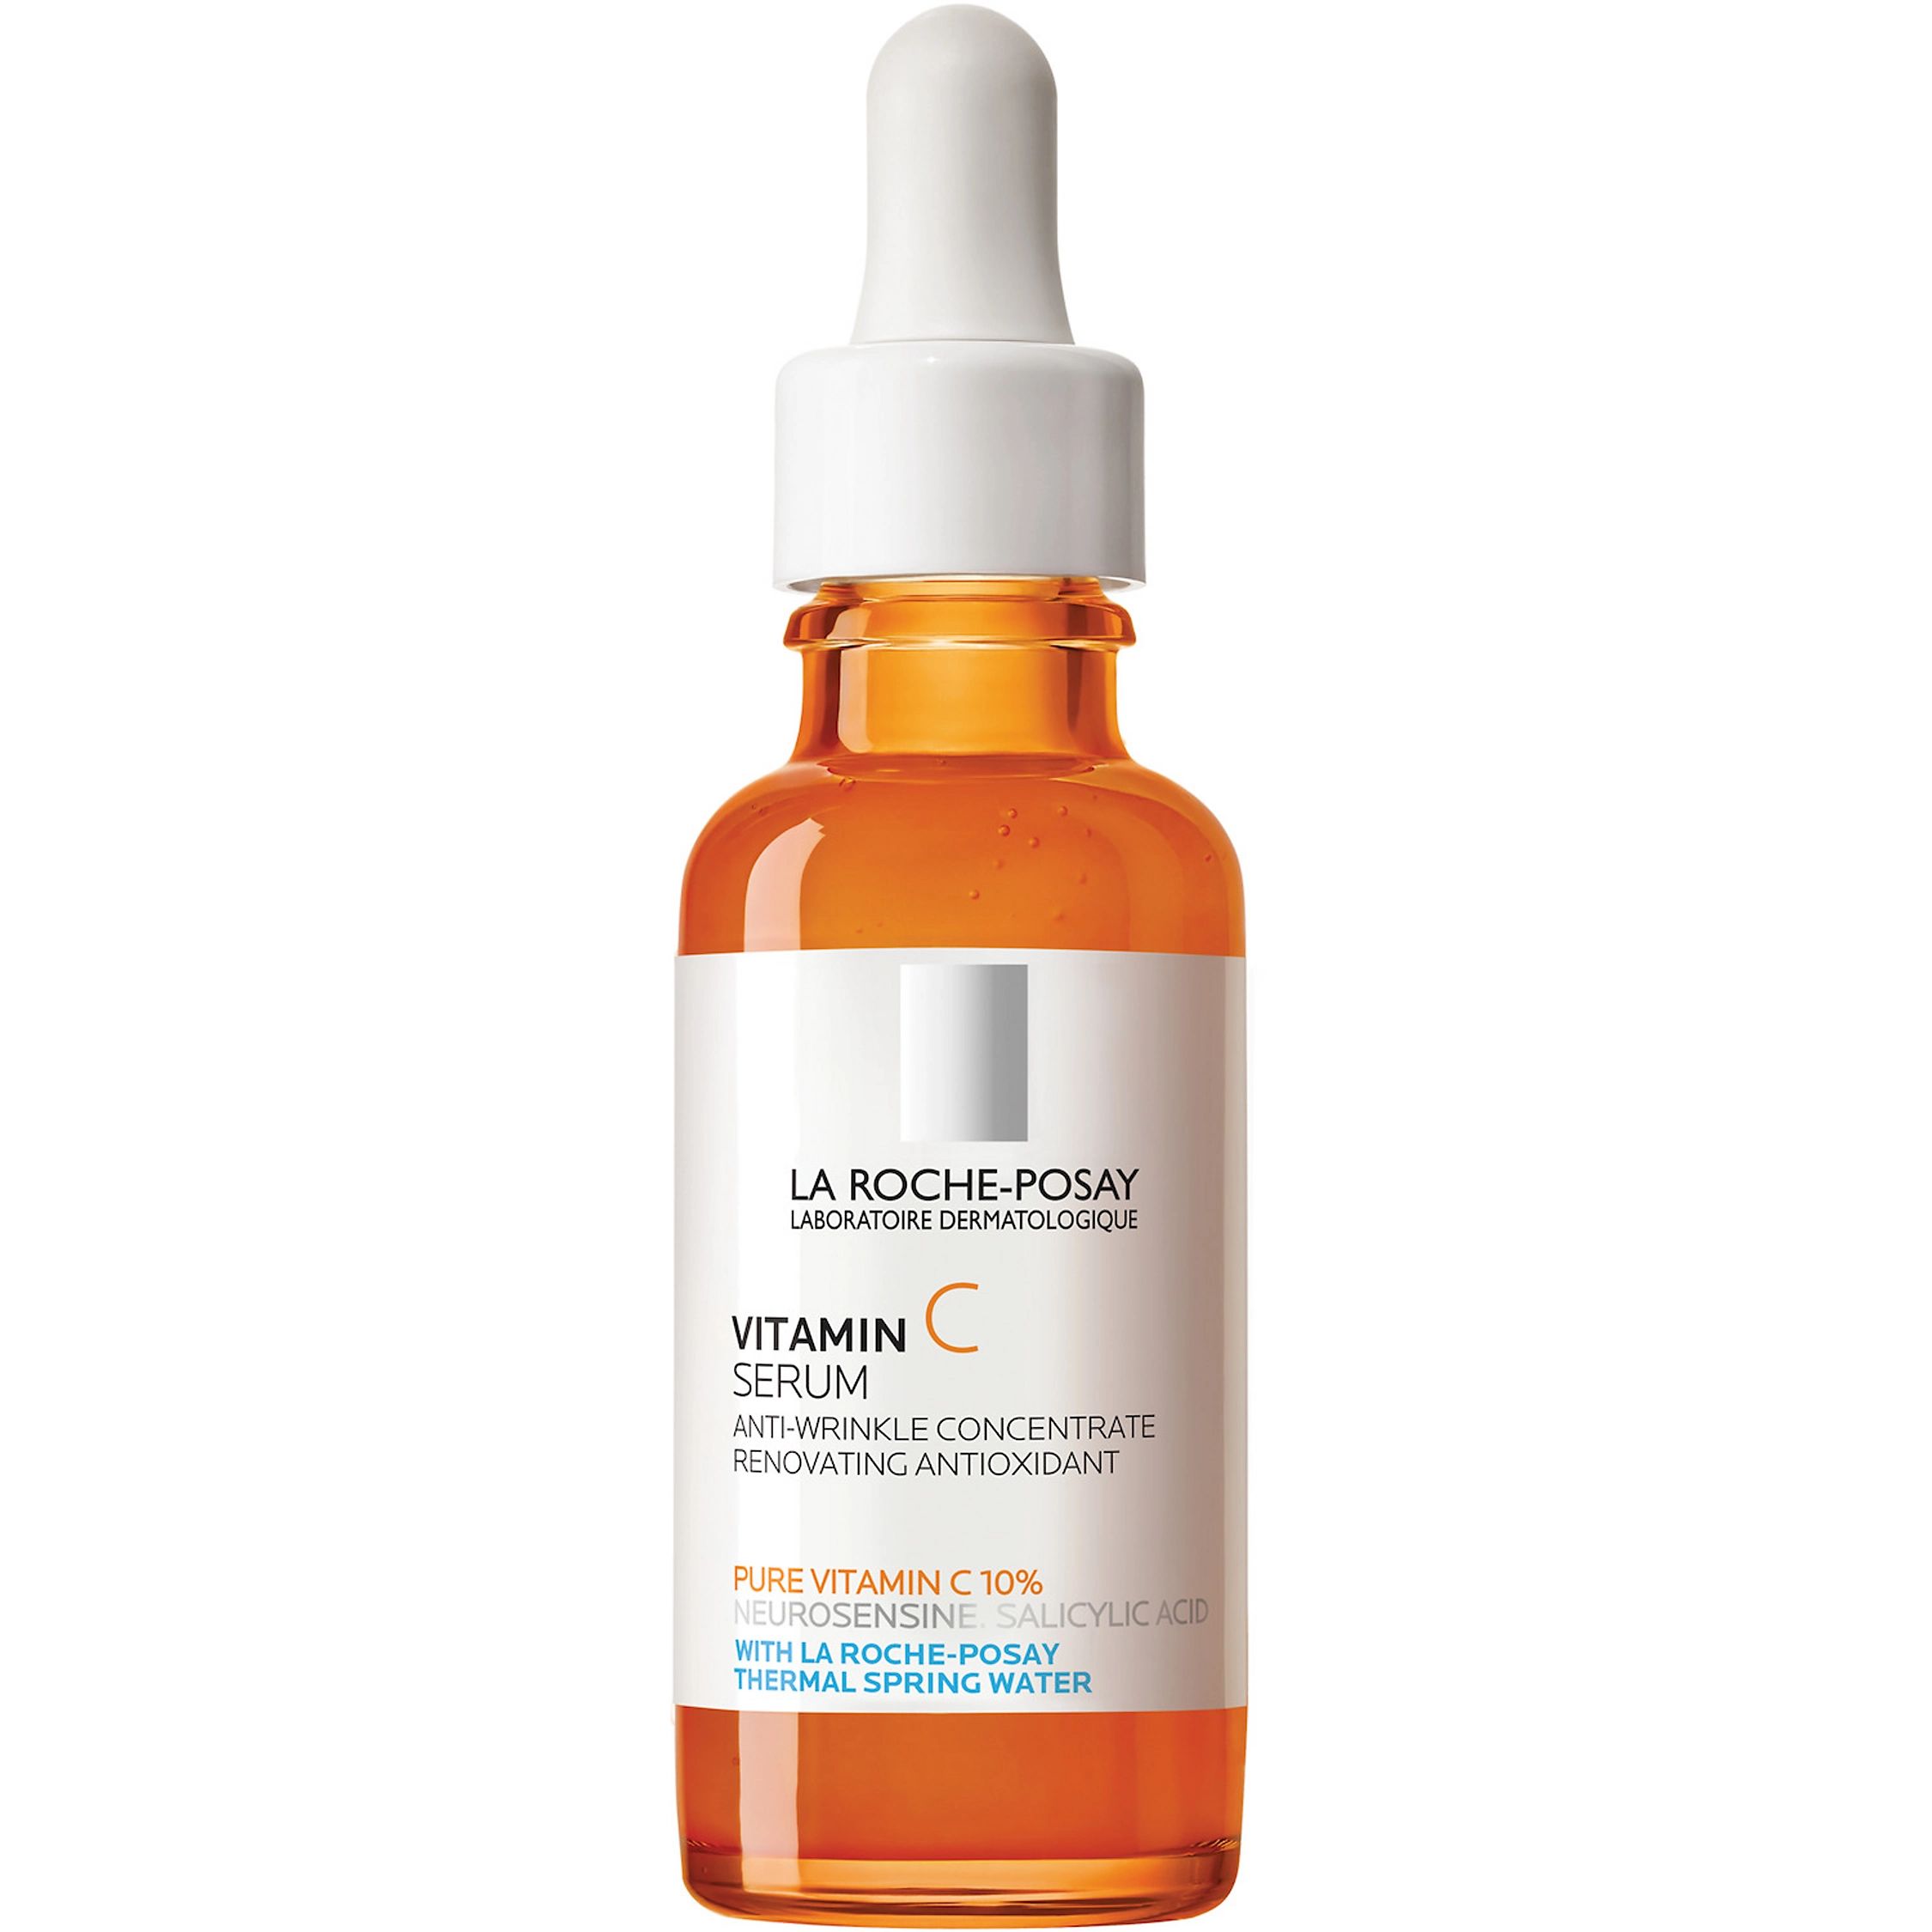 La Roche-Posay Pure Vitamin C Face Serum with Salicylic Acid for Wrinkles | Kohl's